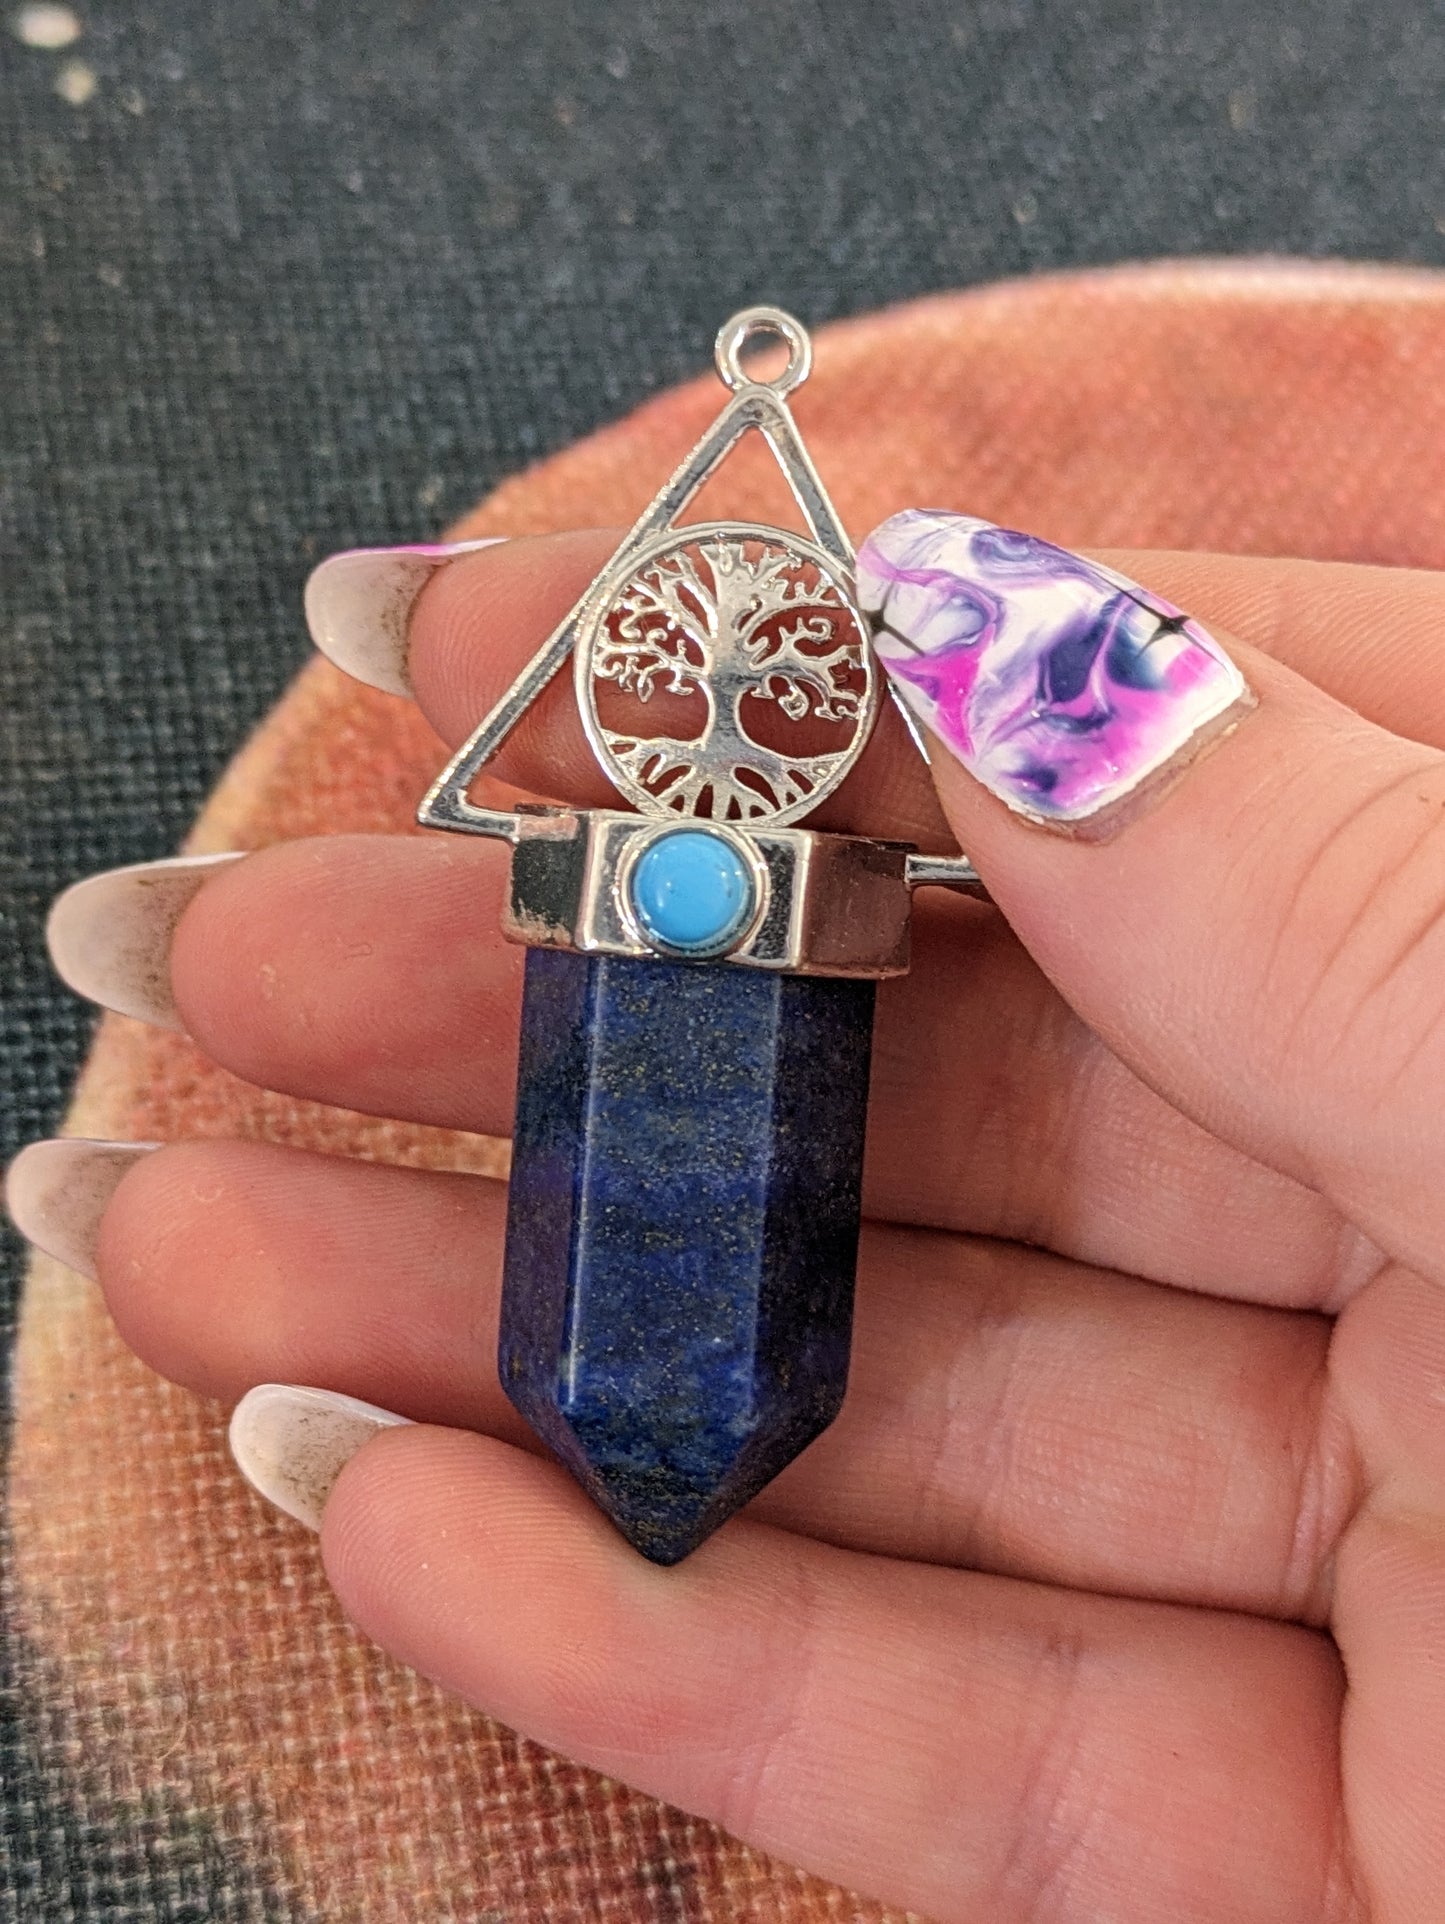 Lapis Lazuli "Deathly hallows inspired" Necklace